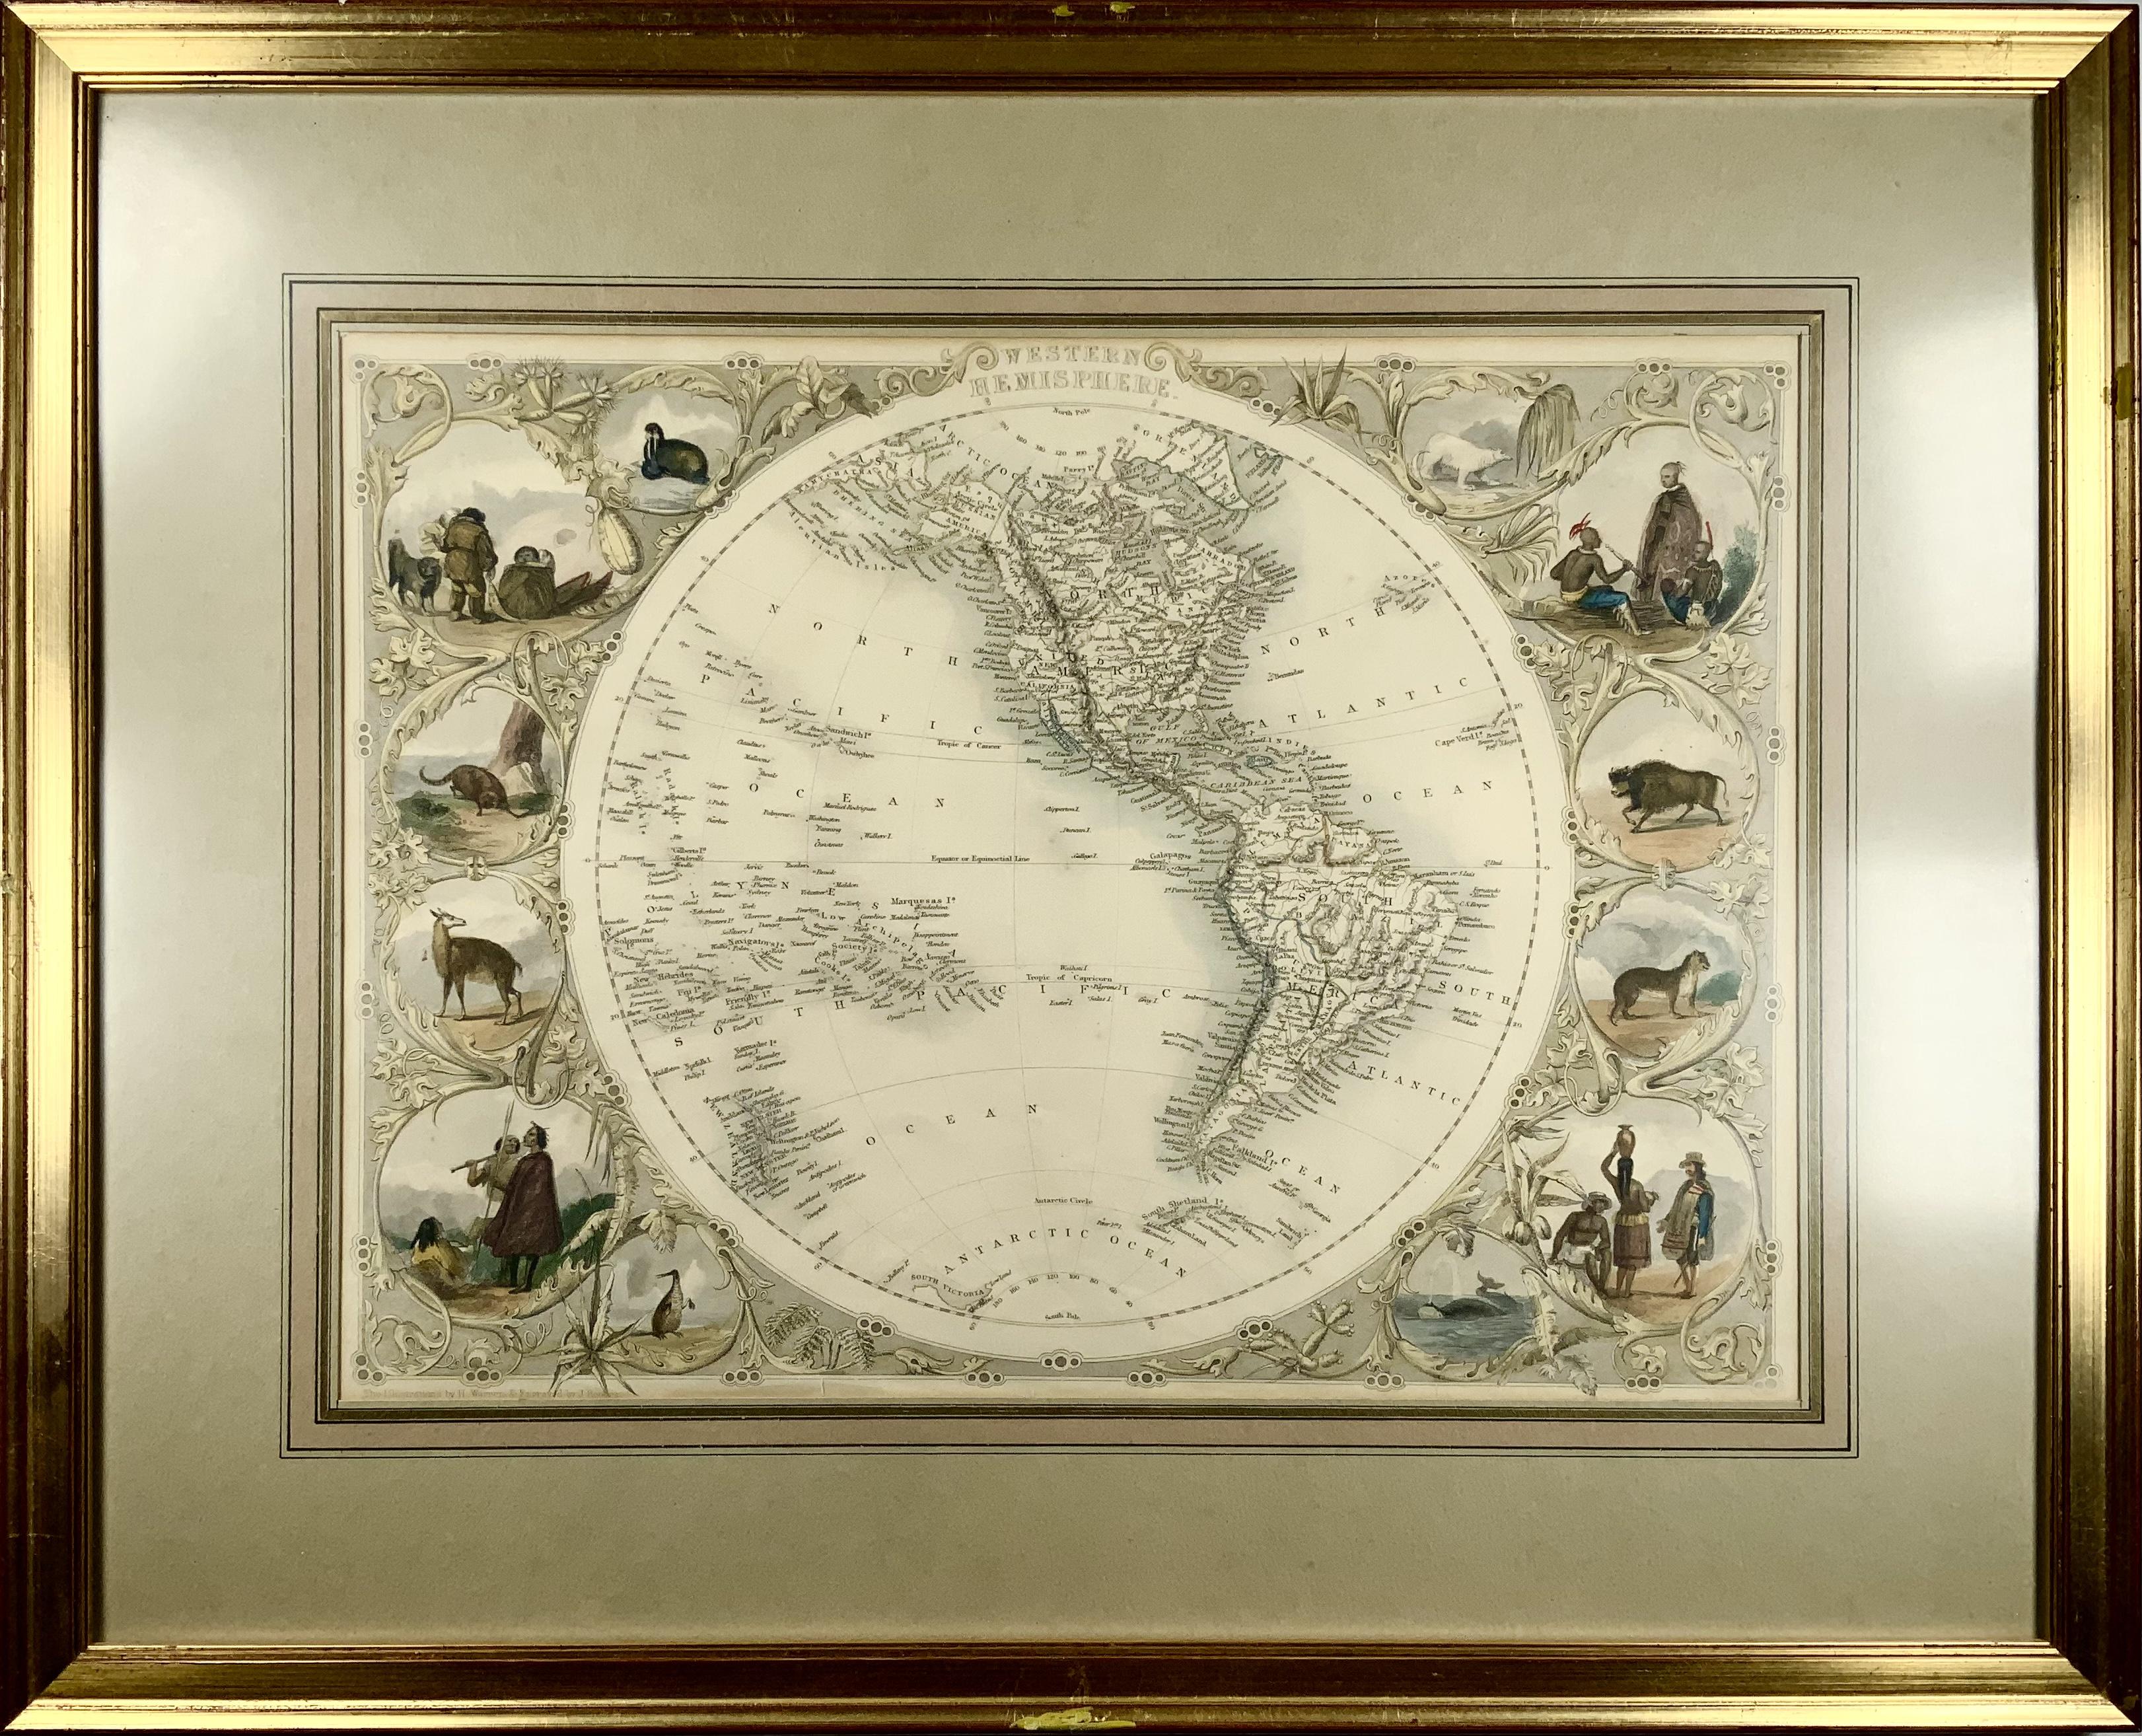 Western Hemisphere - America

Framed in relatively modern gilt frame and matting.

Tallis' decorative maps provided up-to-date geographical knowledge, but also used vignette views within the map's design to show the native people and their